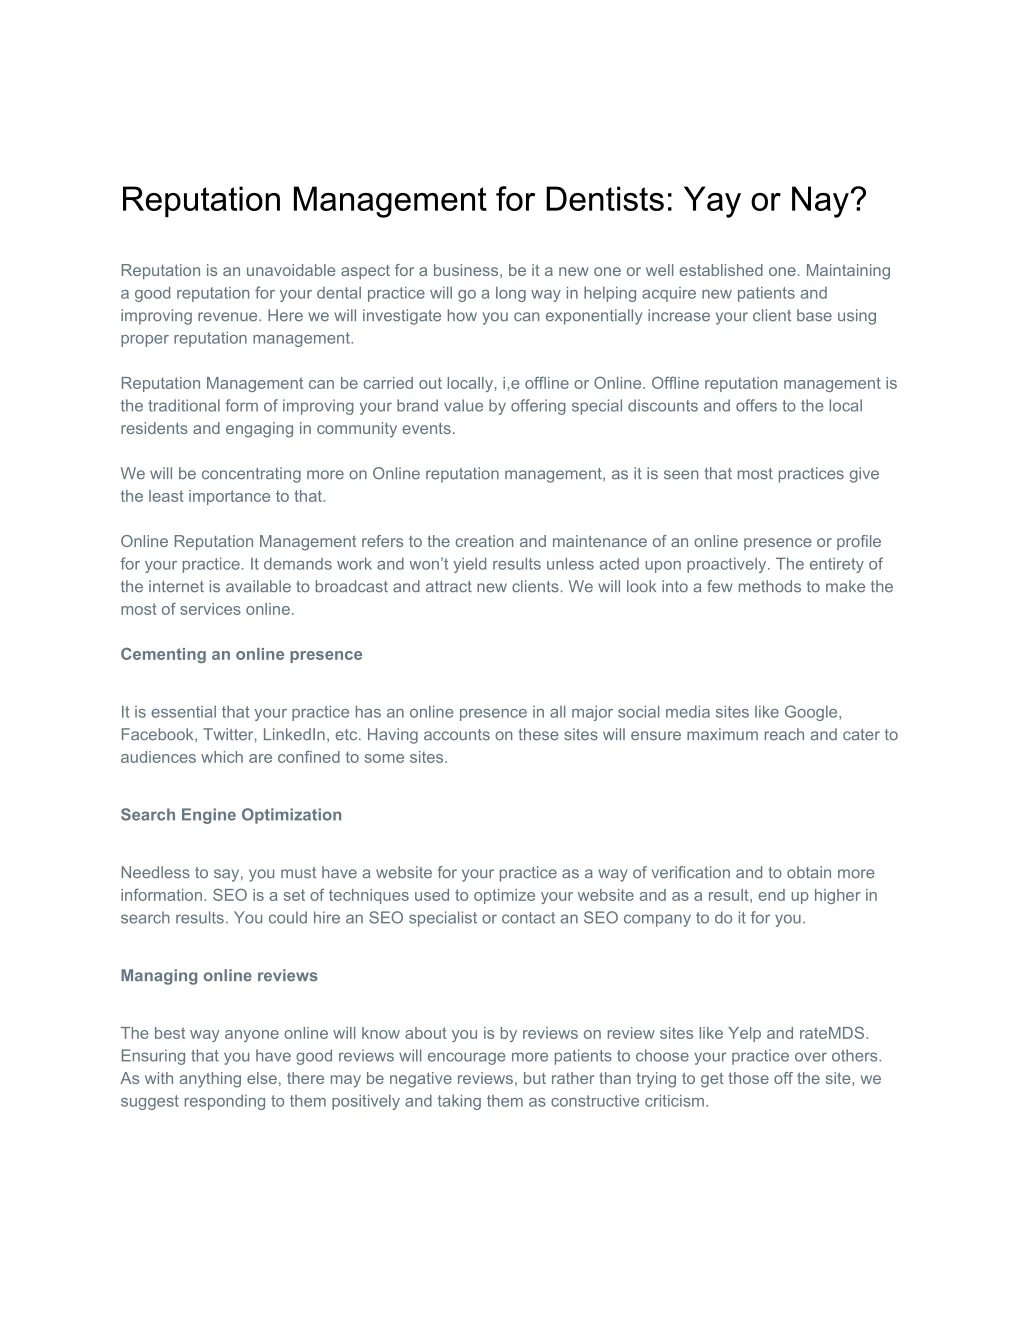 reputation management for dentists yay or nay